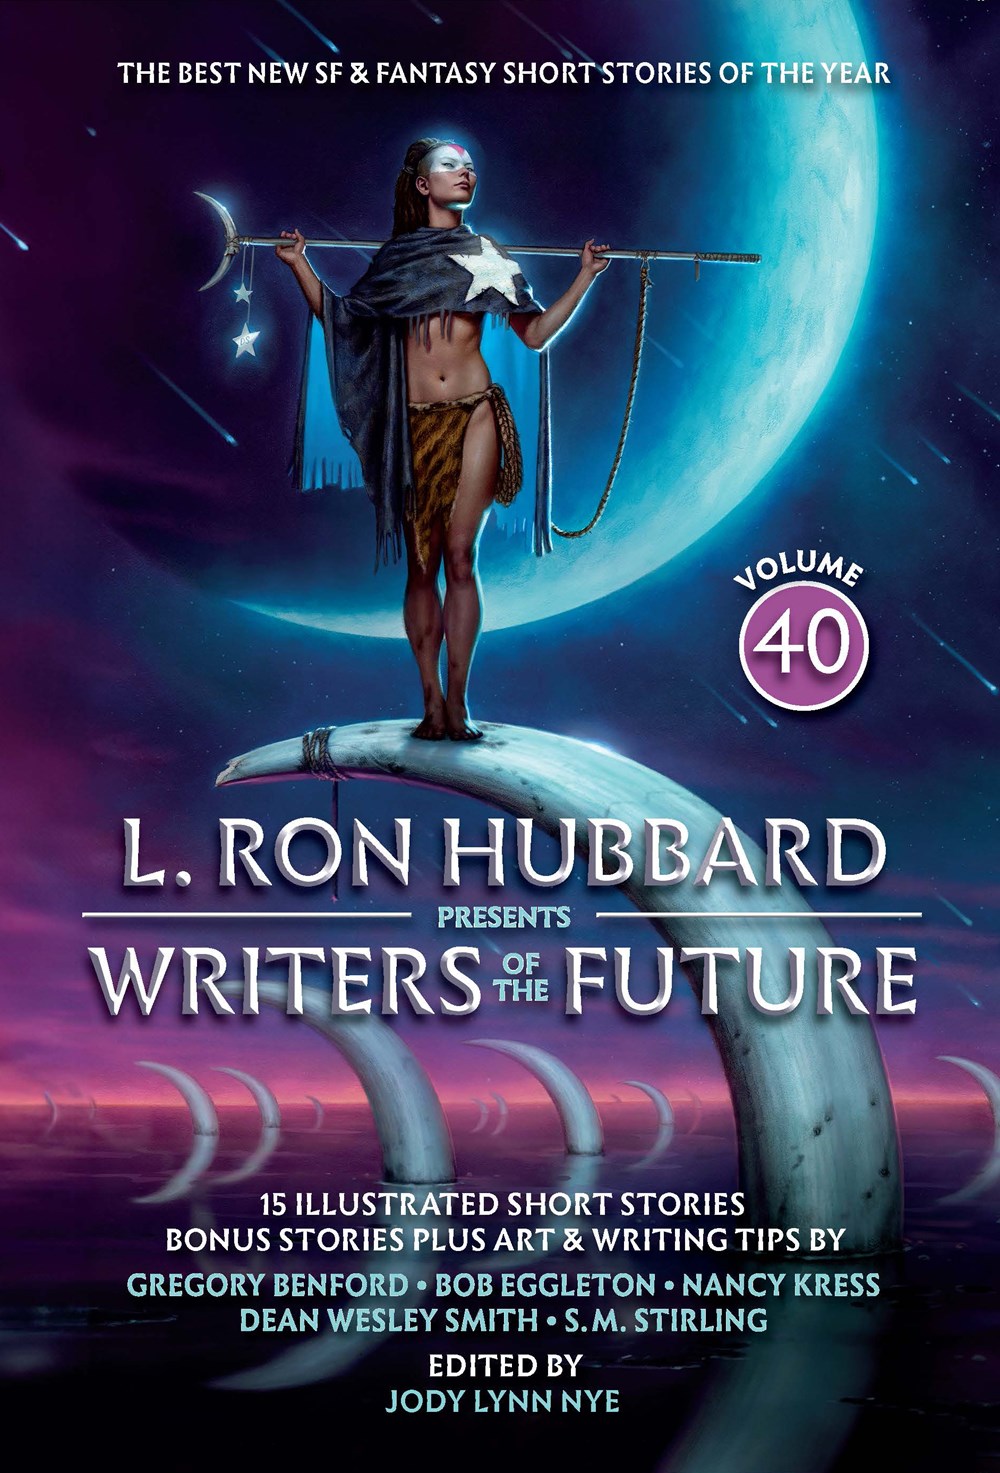 L. Ron Hubbard Presents Writers of the Future, Vol. 40: The Best New SF & Fantasy of the Year